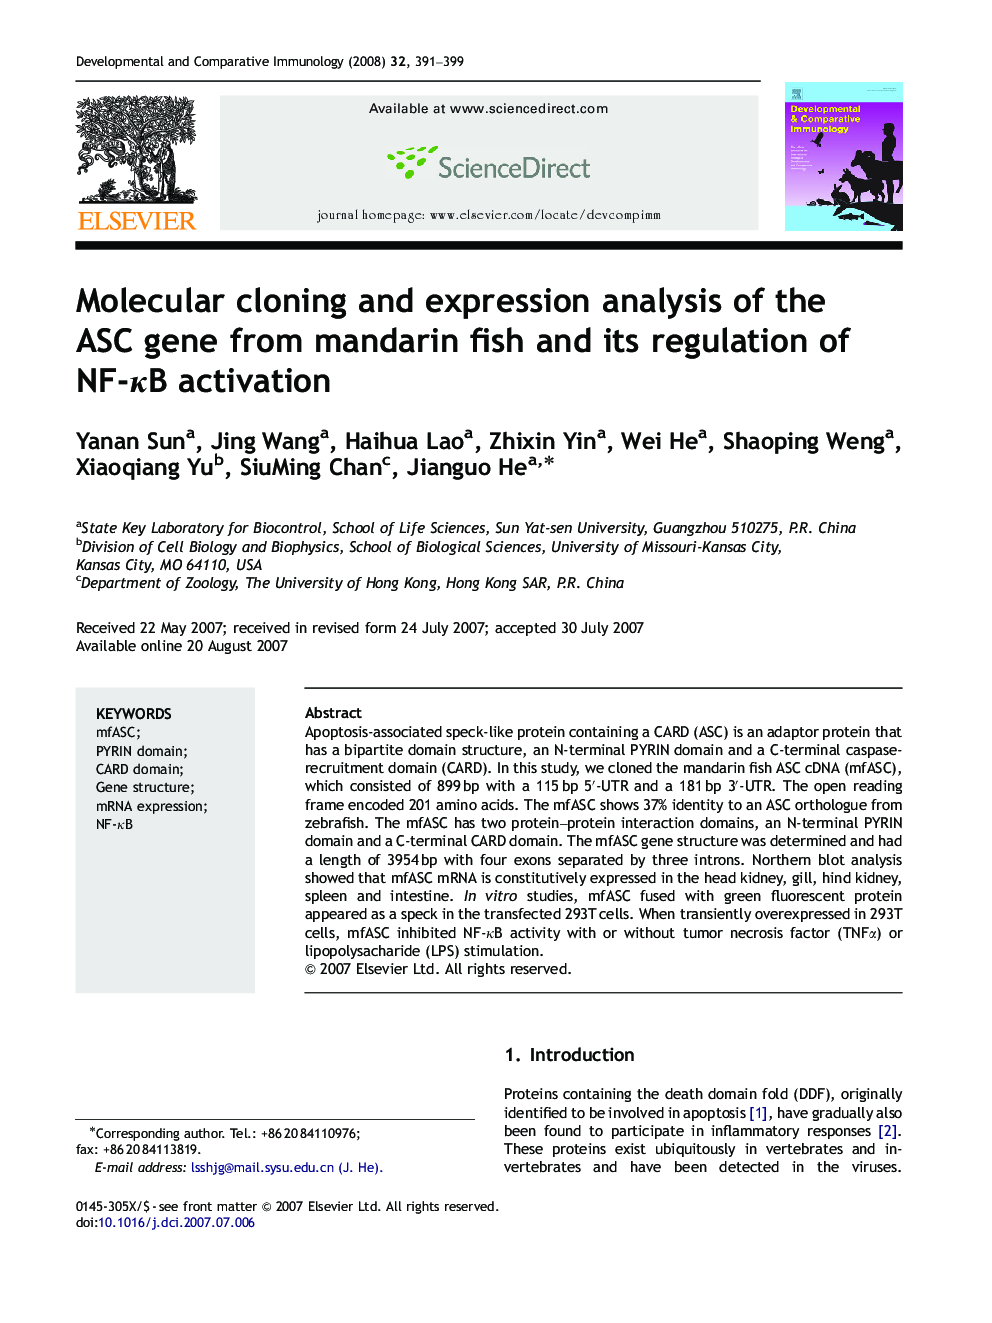 Molecular cloning and expression analysis of the ASC gene from mandarin fish and its regulation of NF-ÎºB activation